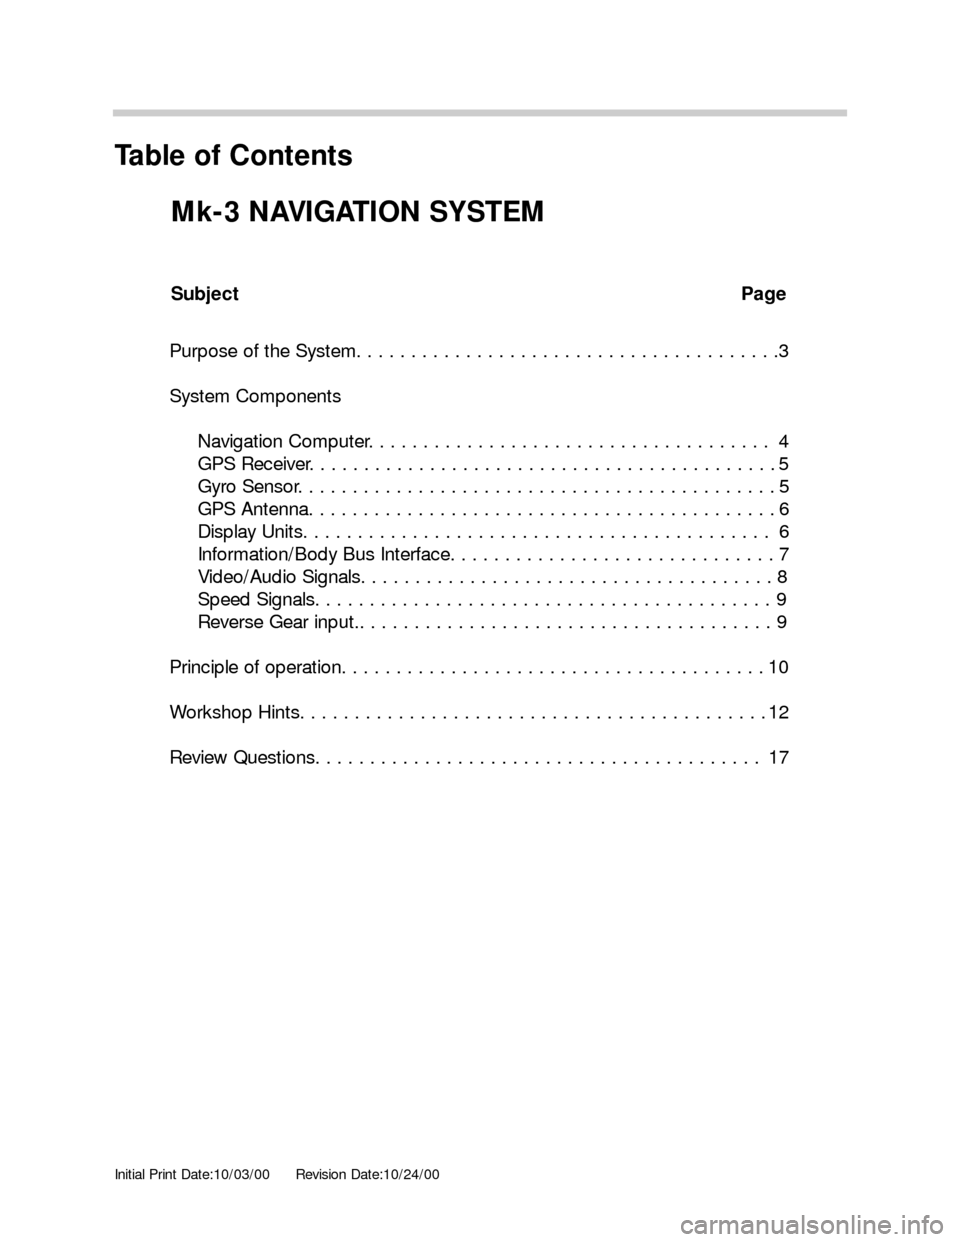 BMW X5 2002 E53 Mk3 Navigation System Manual Initial Print Date:10/03/00Revision Date:10/24/00
Subject Page
Purpose of the System. . . . . . . . . . . . . . . . . . . . . . . . . . . . . . . . . . . . . . .3
System Components
Navigation Computer